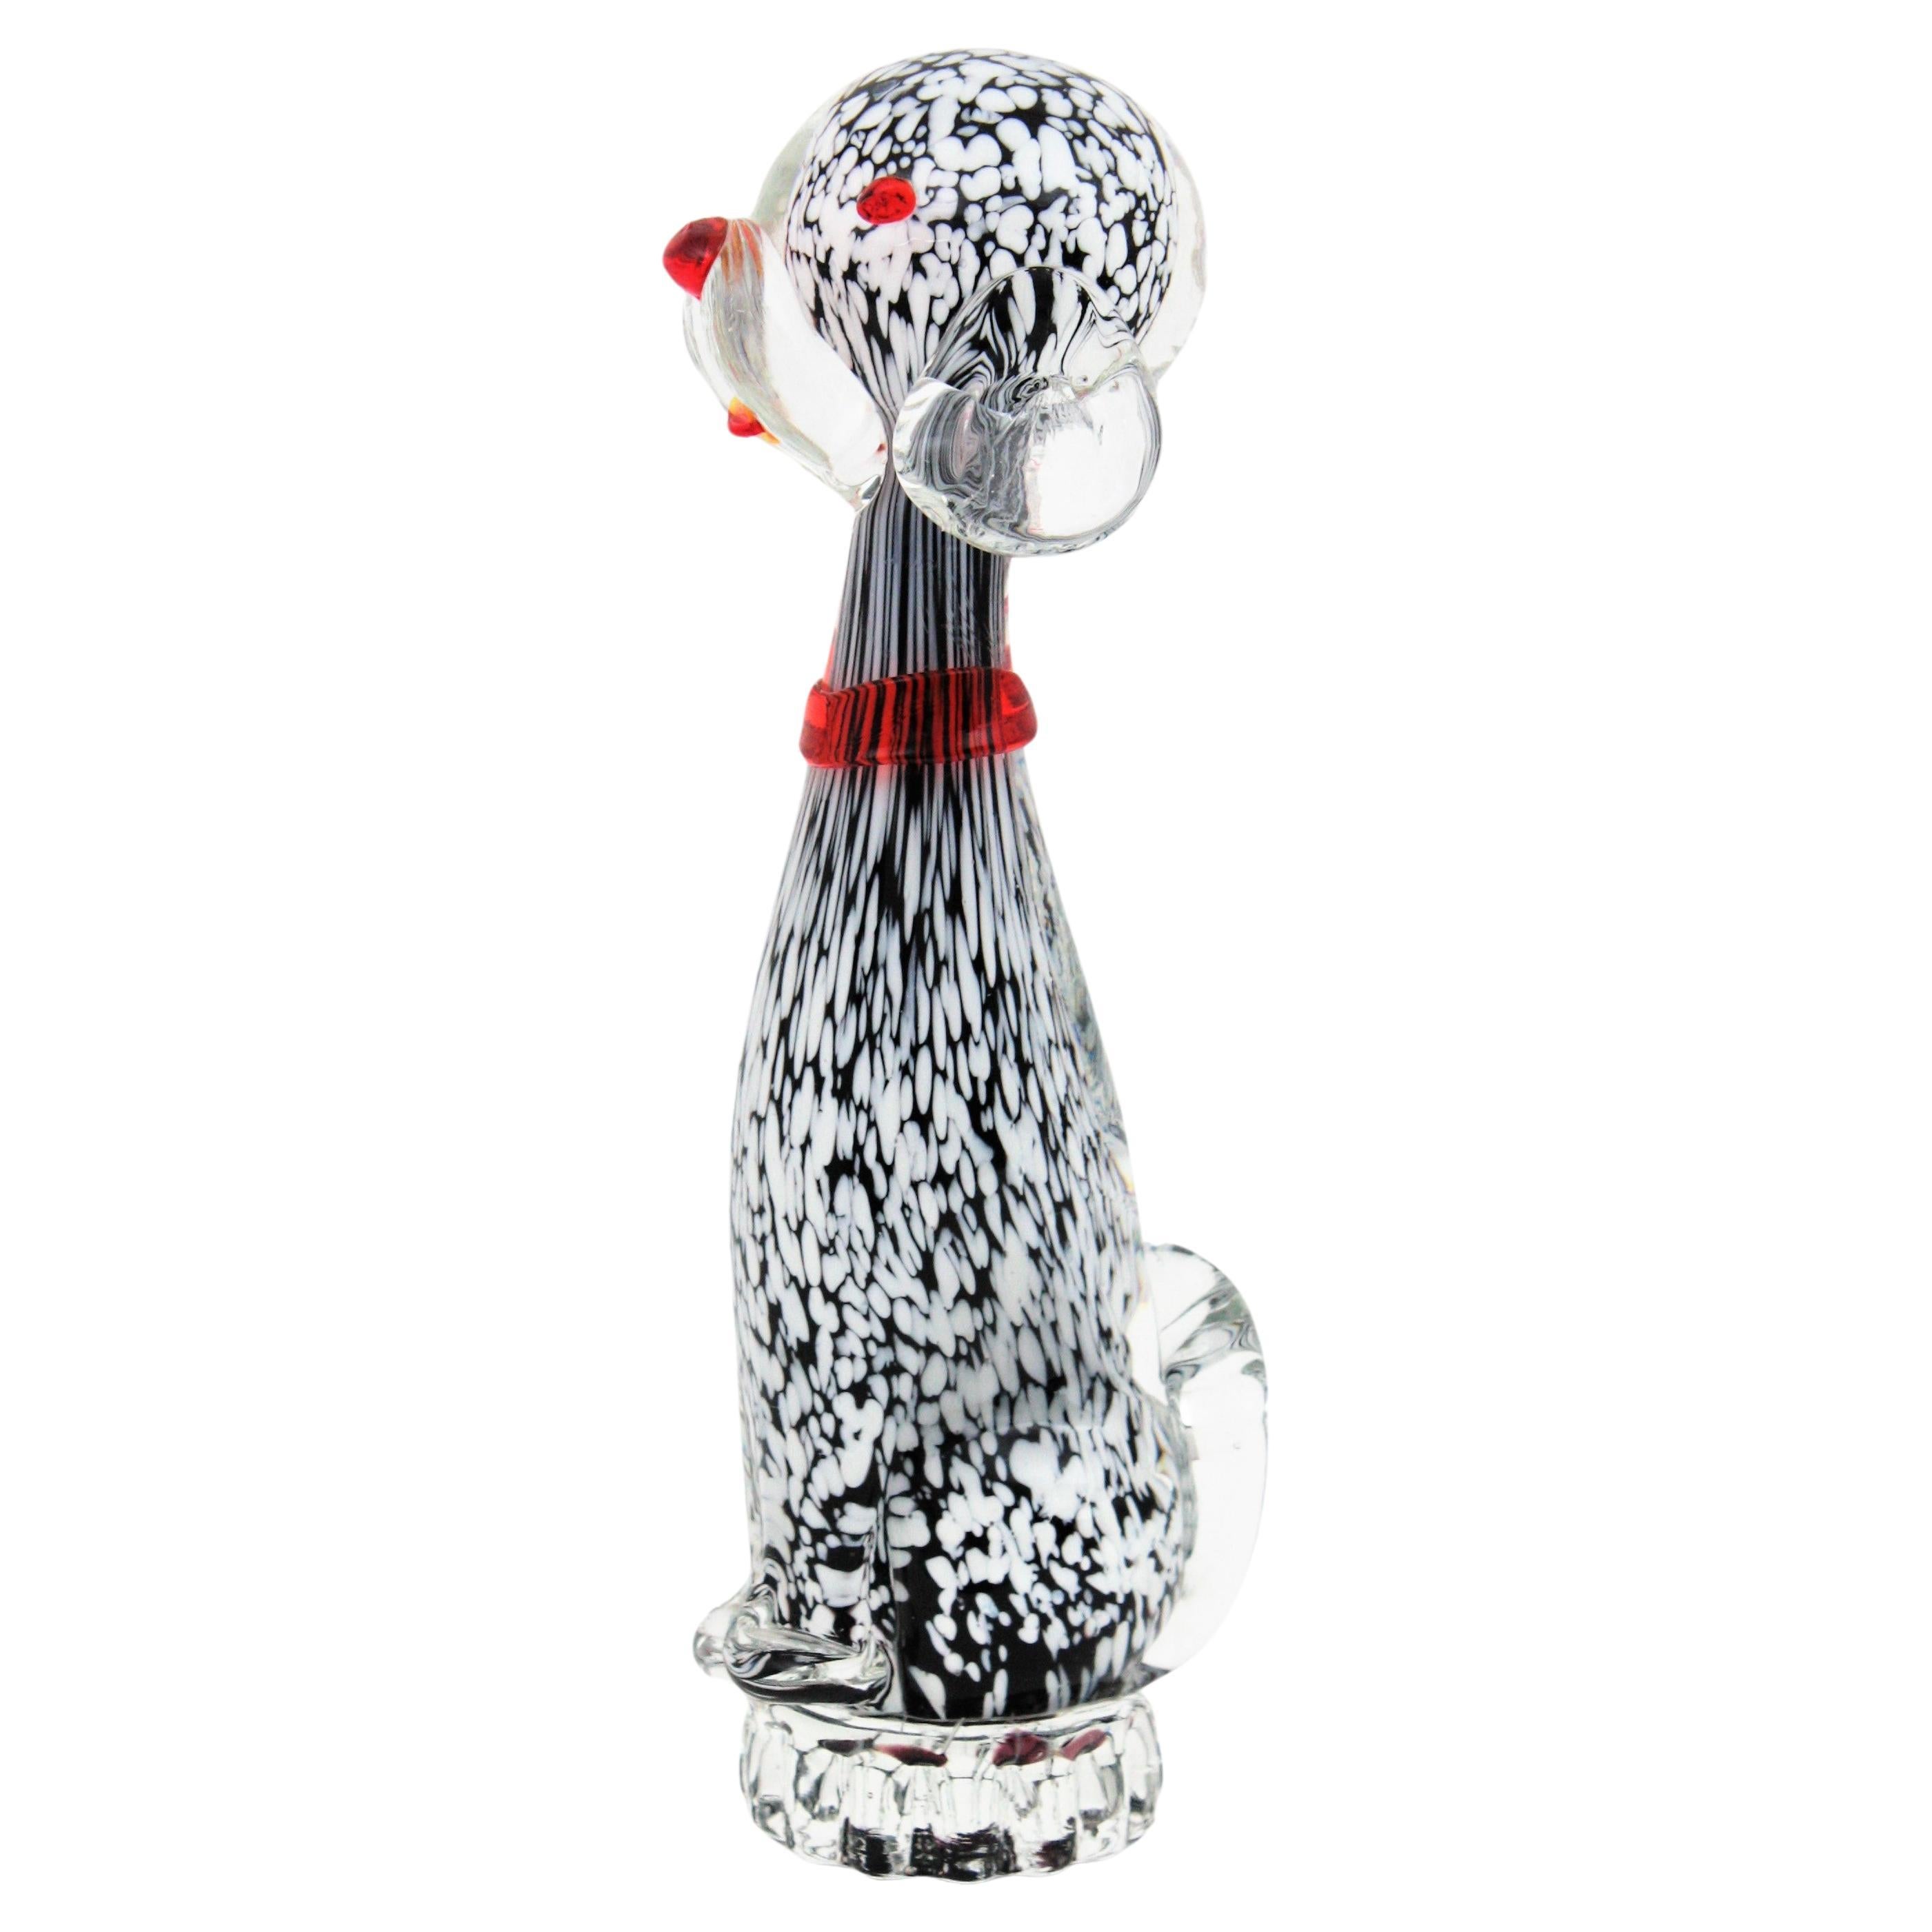 Dalmatian Murano Glass Black White Spotted Puppy Dog Figure Paperweight For Sale